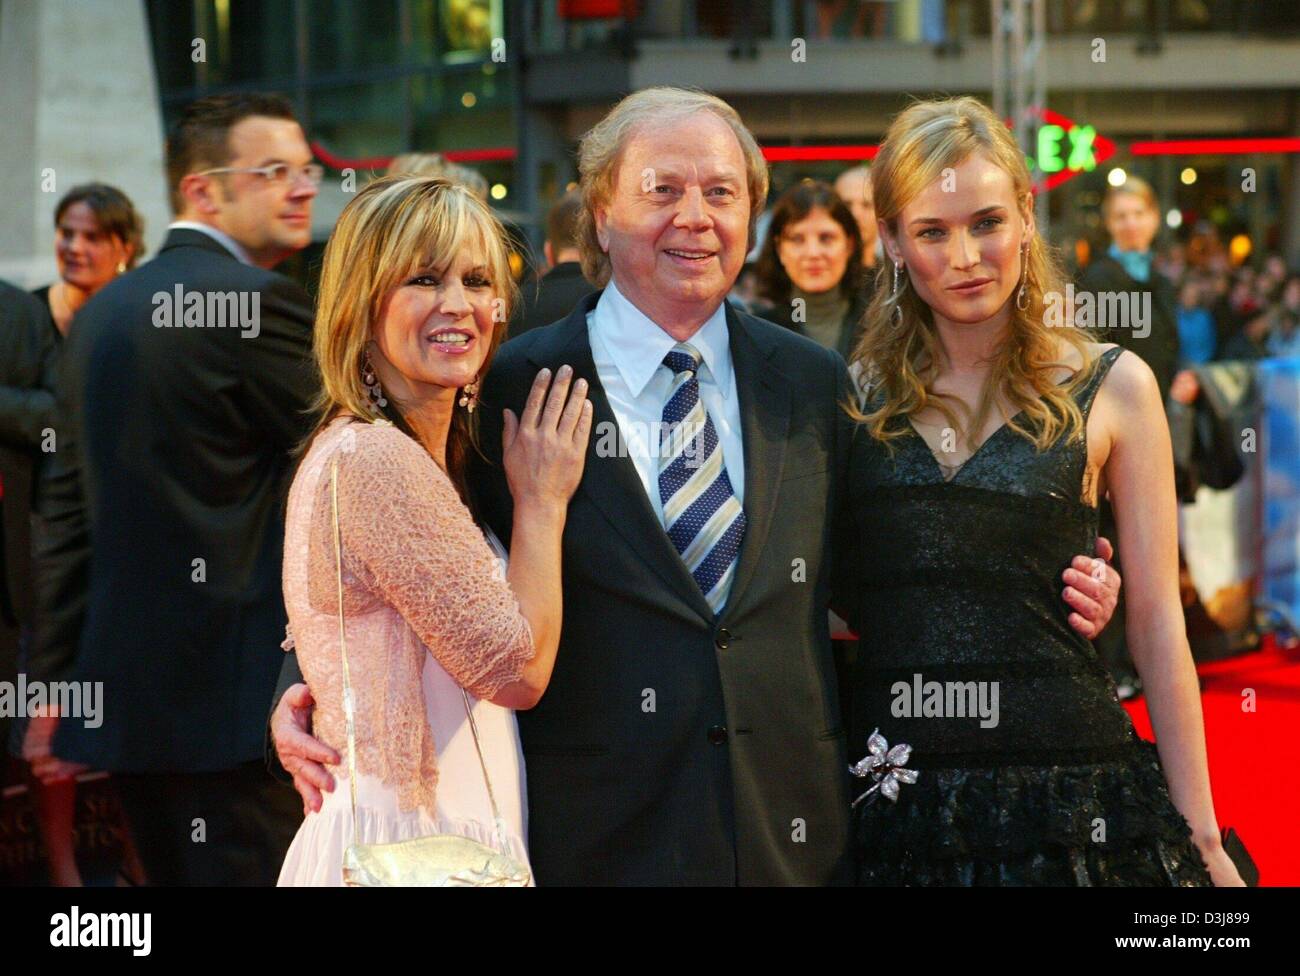 (dpa) - German film director Wolfgang Petersen (C) poses together with his wife Maria (L) and German actress Diane Kruger on their arrival to the premiere of Petersen's new film 'Troy' in Berlin, 9 May 2004. The film is going to be released in Germany on 13 May 2004. Stock Photo